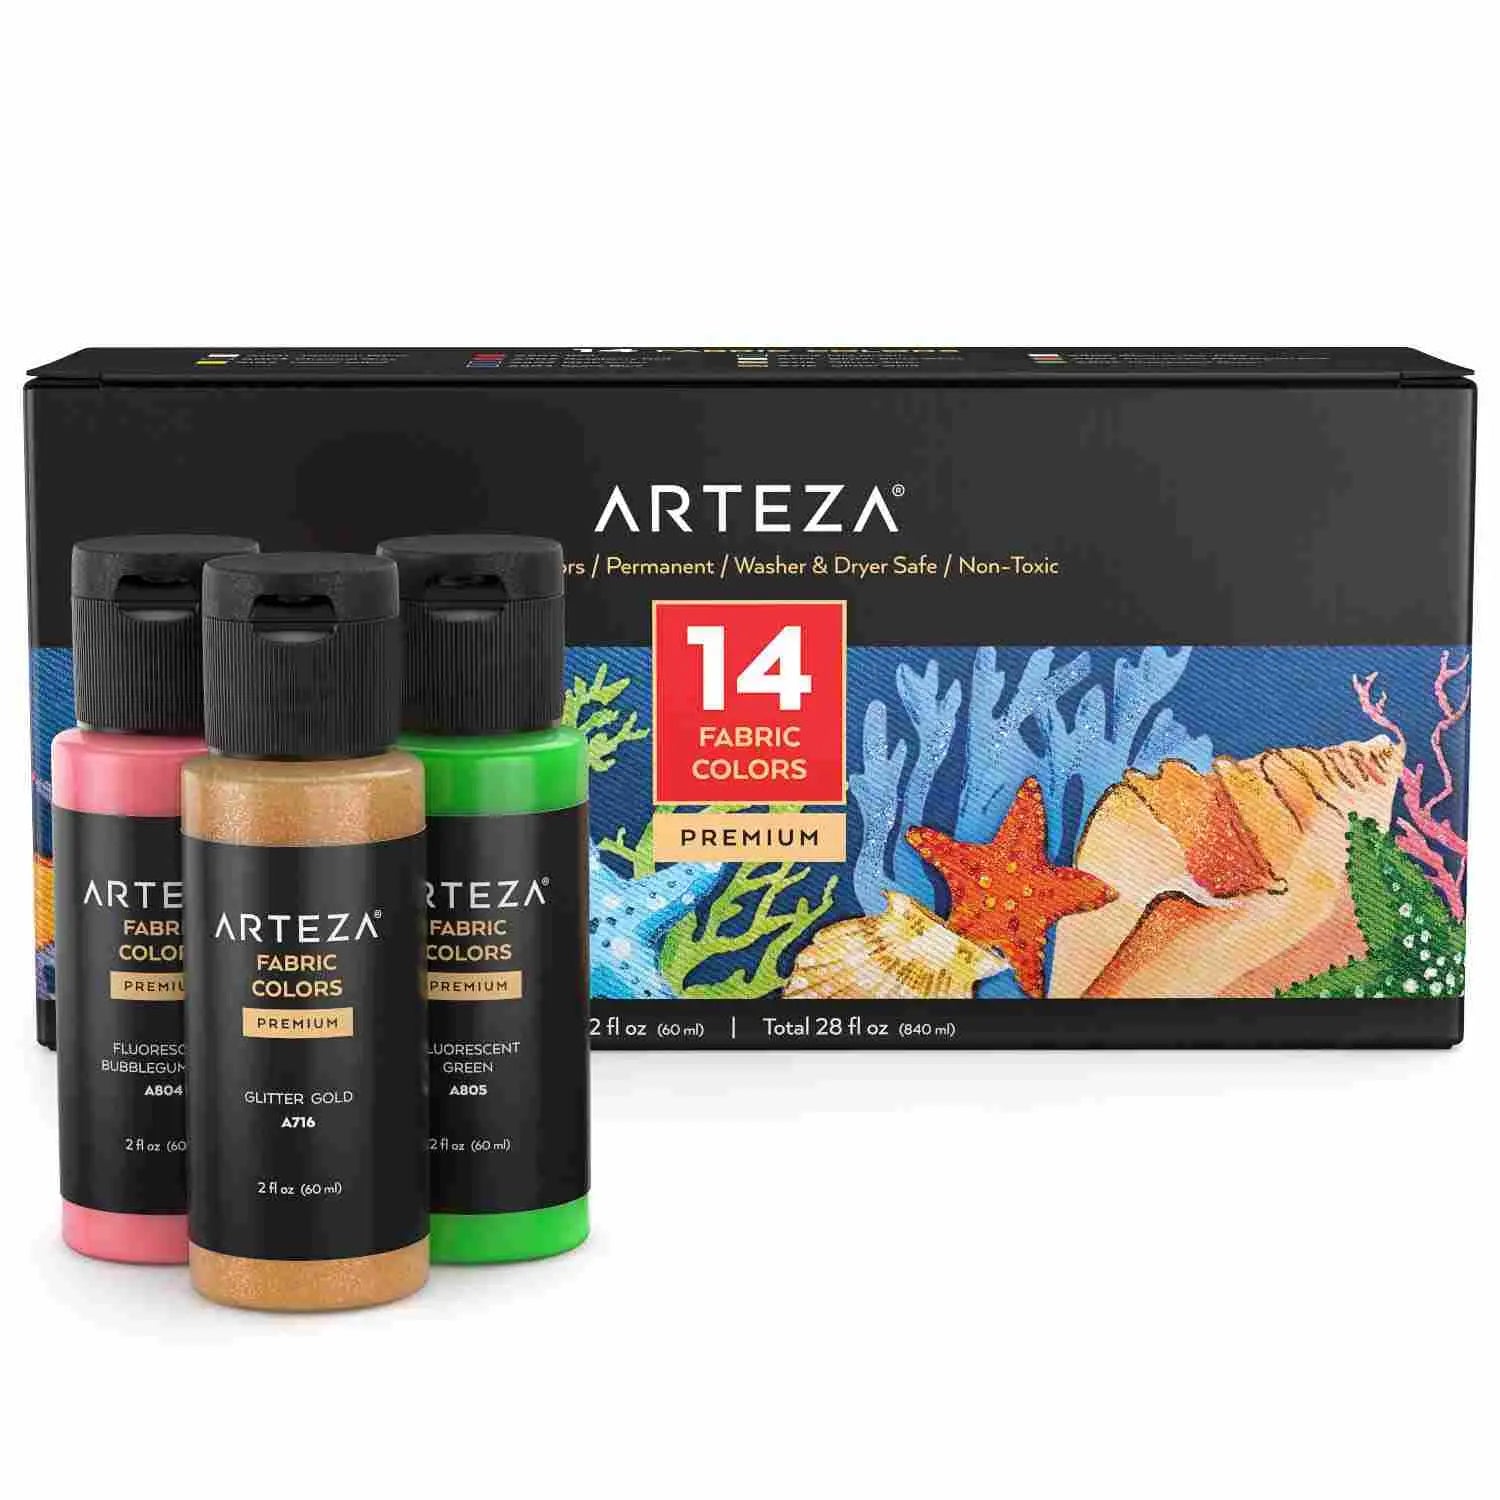 ARTEZA Fabric Paint for Clothes, Set of 14, 60 ml Bottles, Washable Acrylic Textile Paint, Art Supplies for Drawing on T-Shirts, Denim, Cotton, Linen, and Mixed Fabrics Arteza